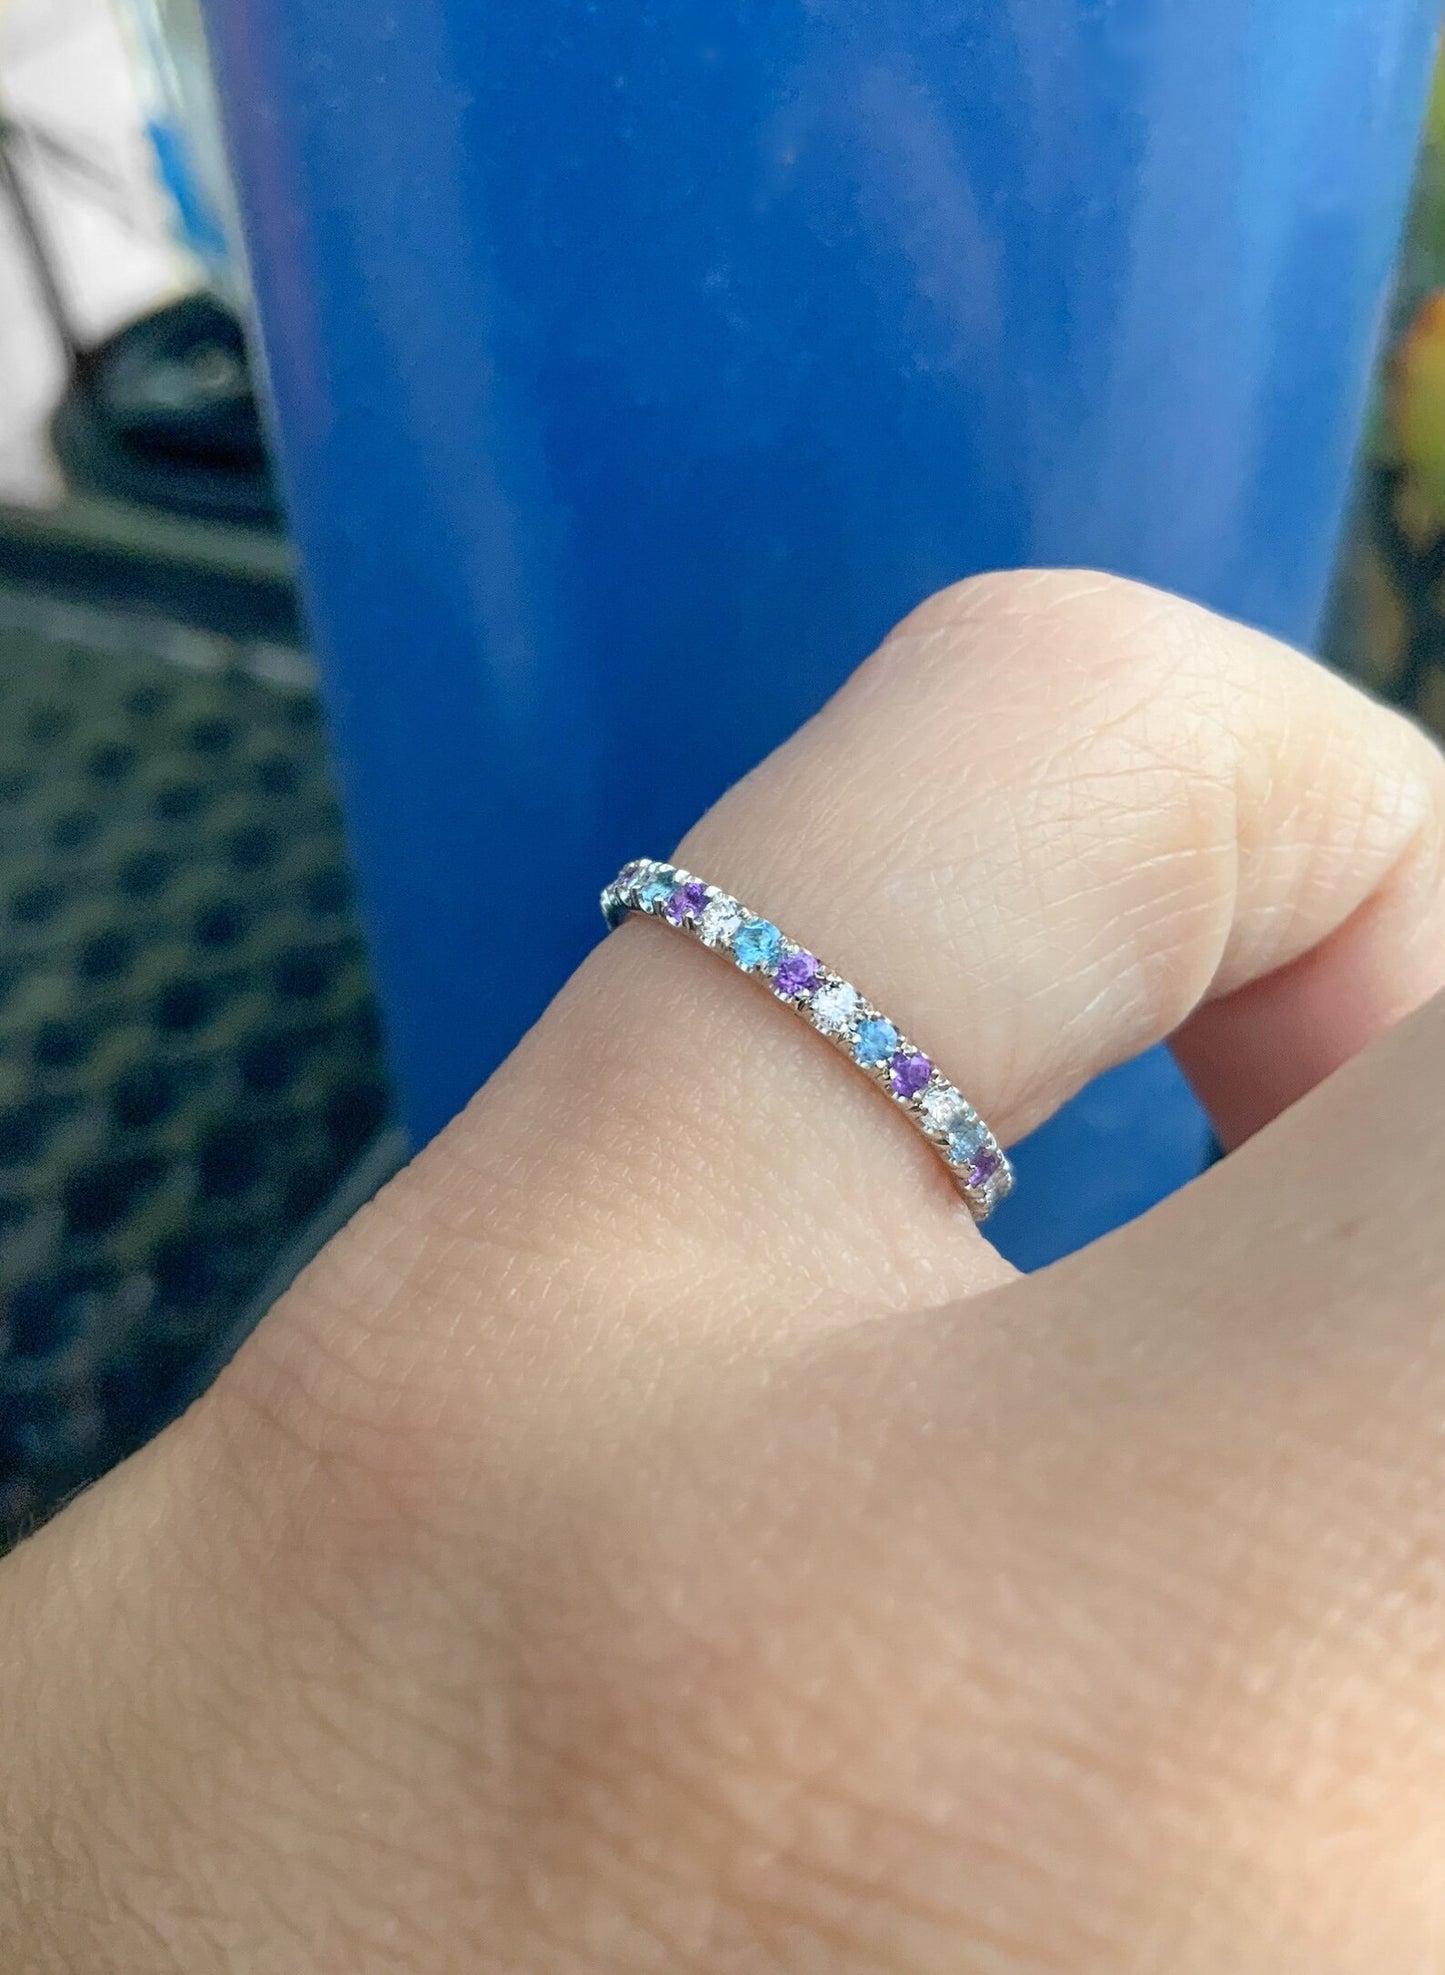 2mm Diamond, Amethyst, and Topaz Pave Eternity Ring